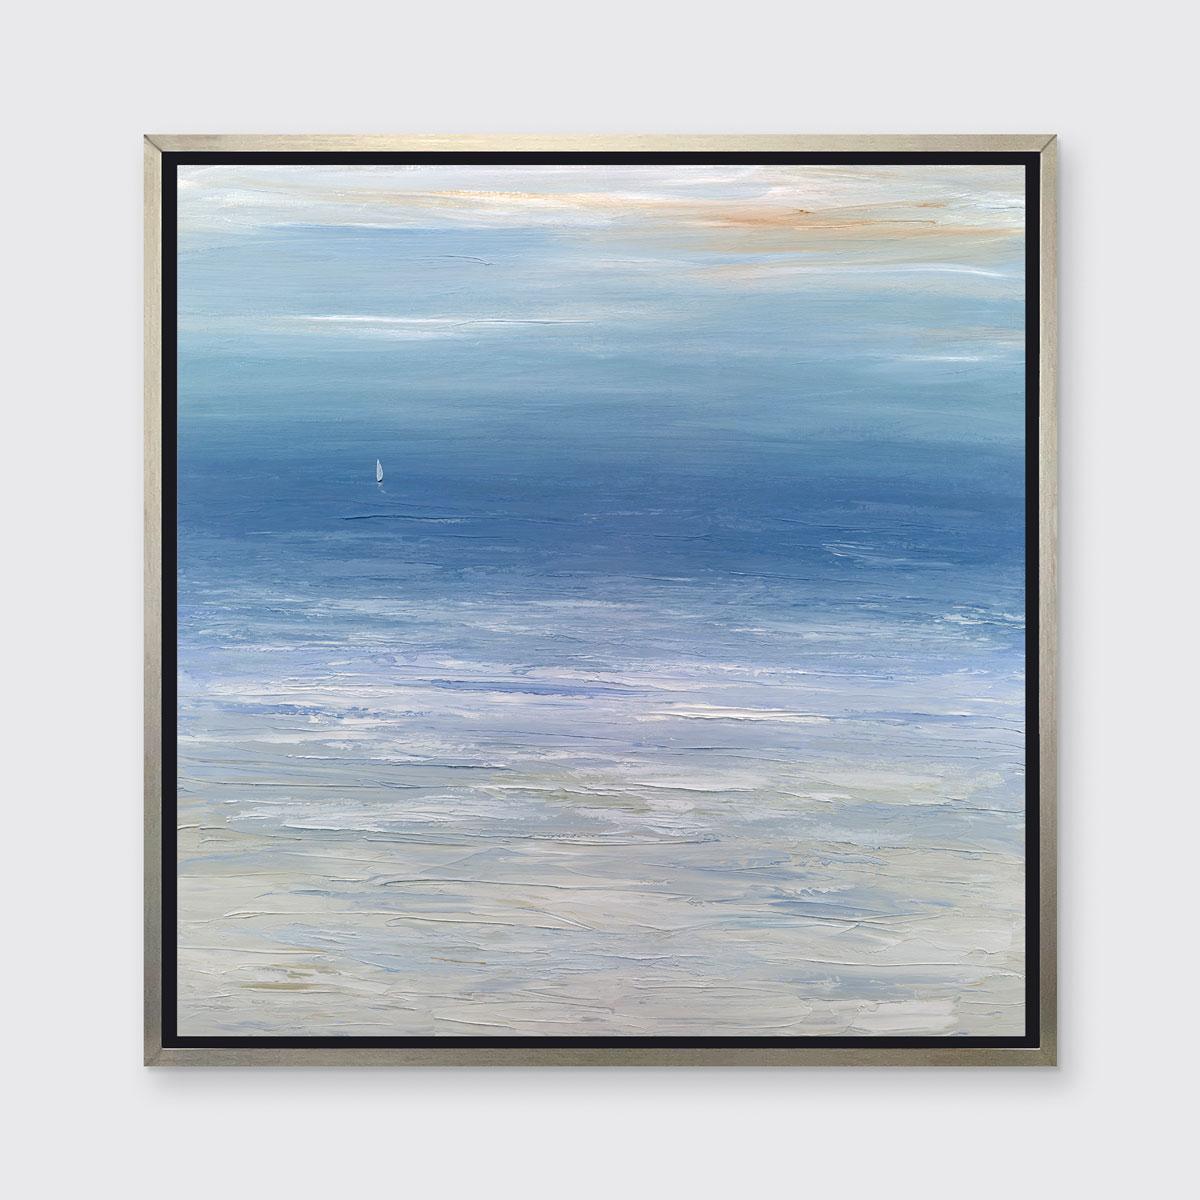 S. Cora Aldo Landscape Print - "Calm Waters II, " Framed Limited Edition Giclee Print, 36" x 36"